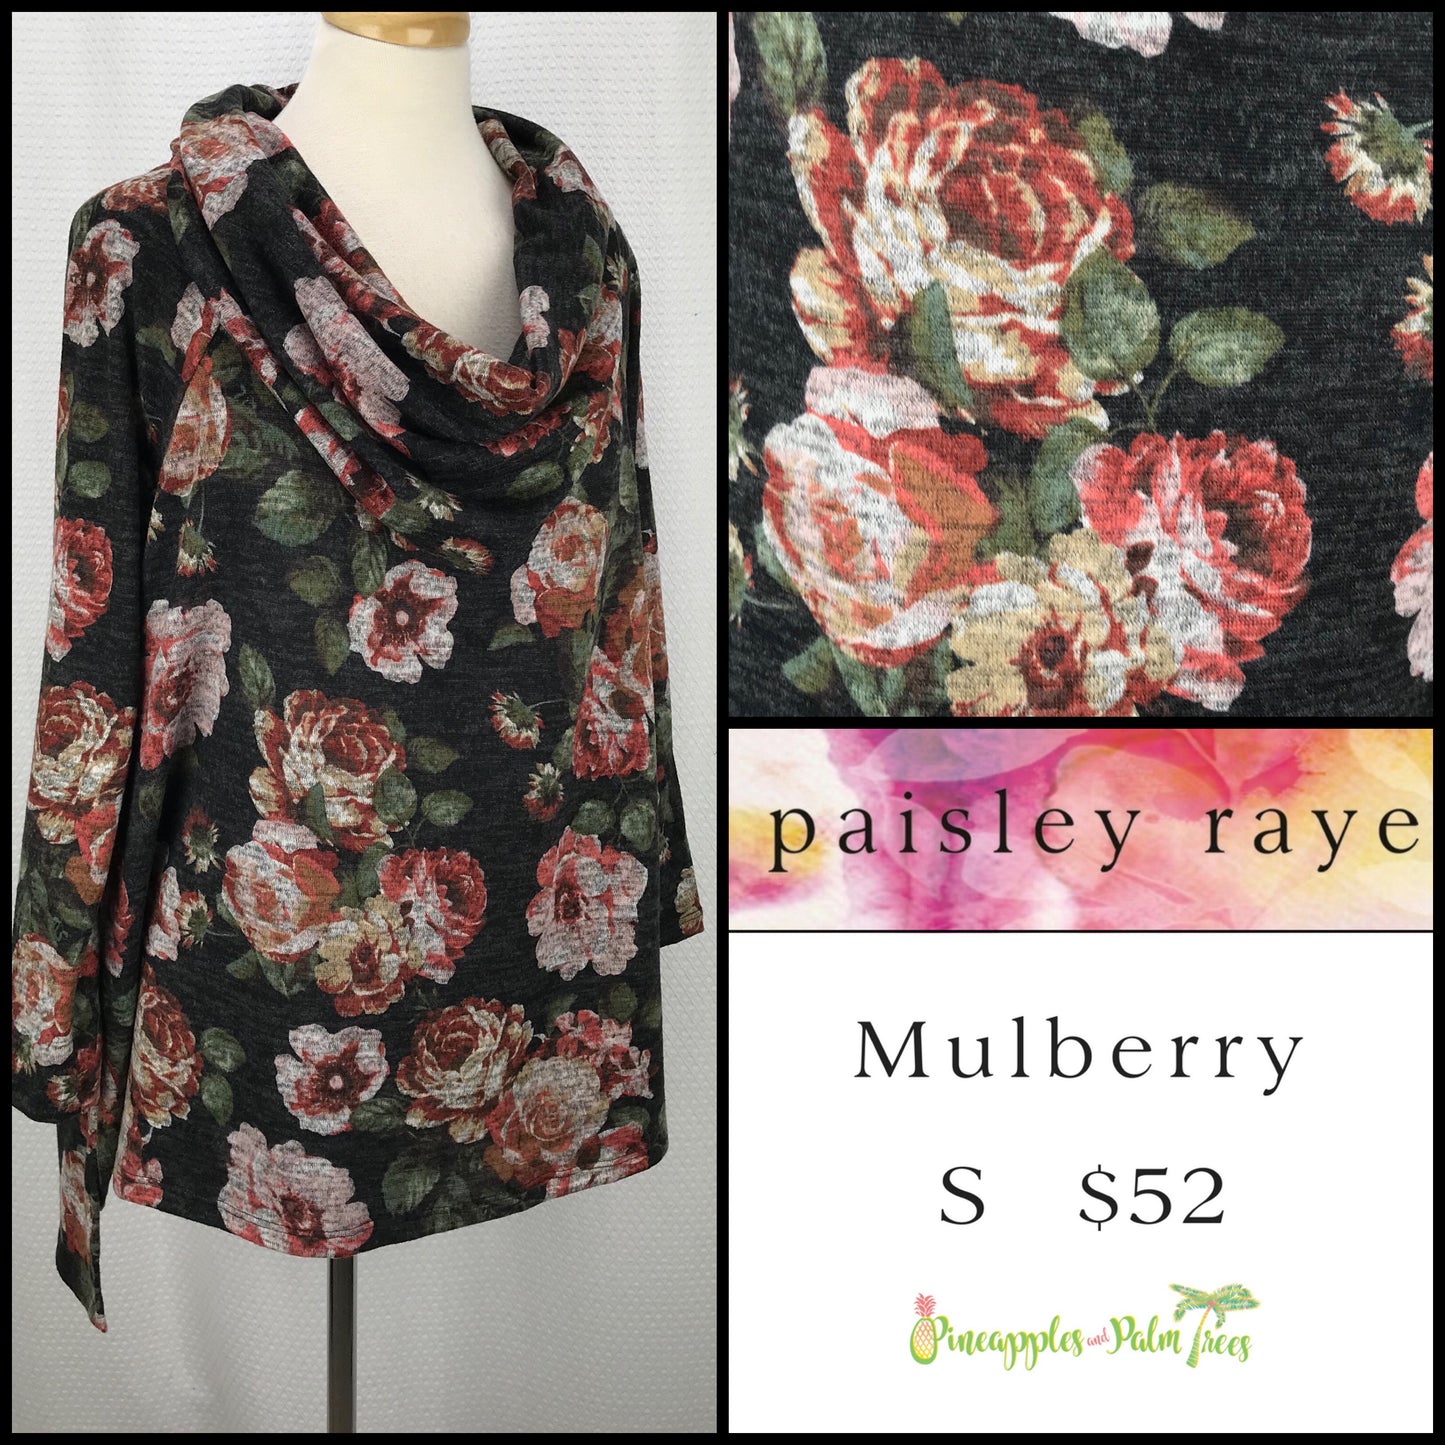 Top: Mulberry S - floral